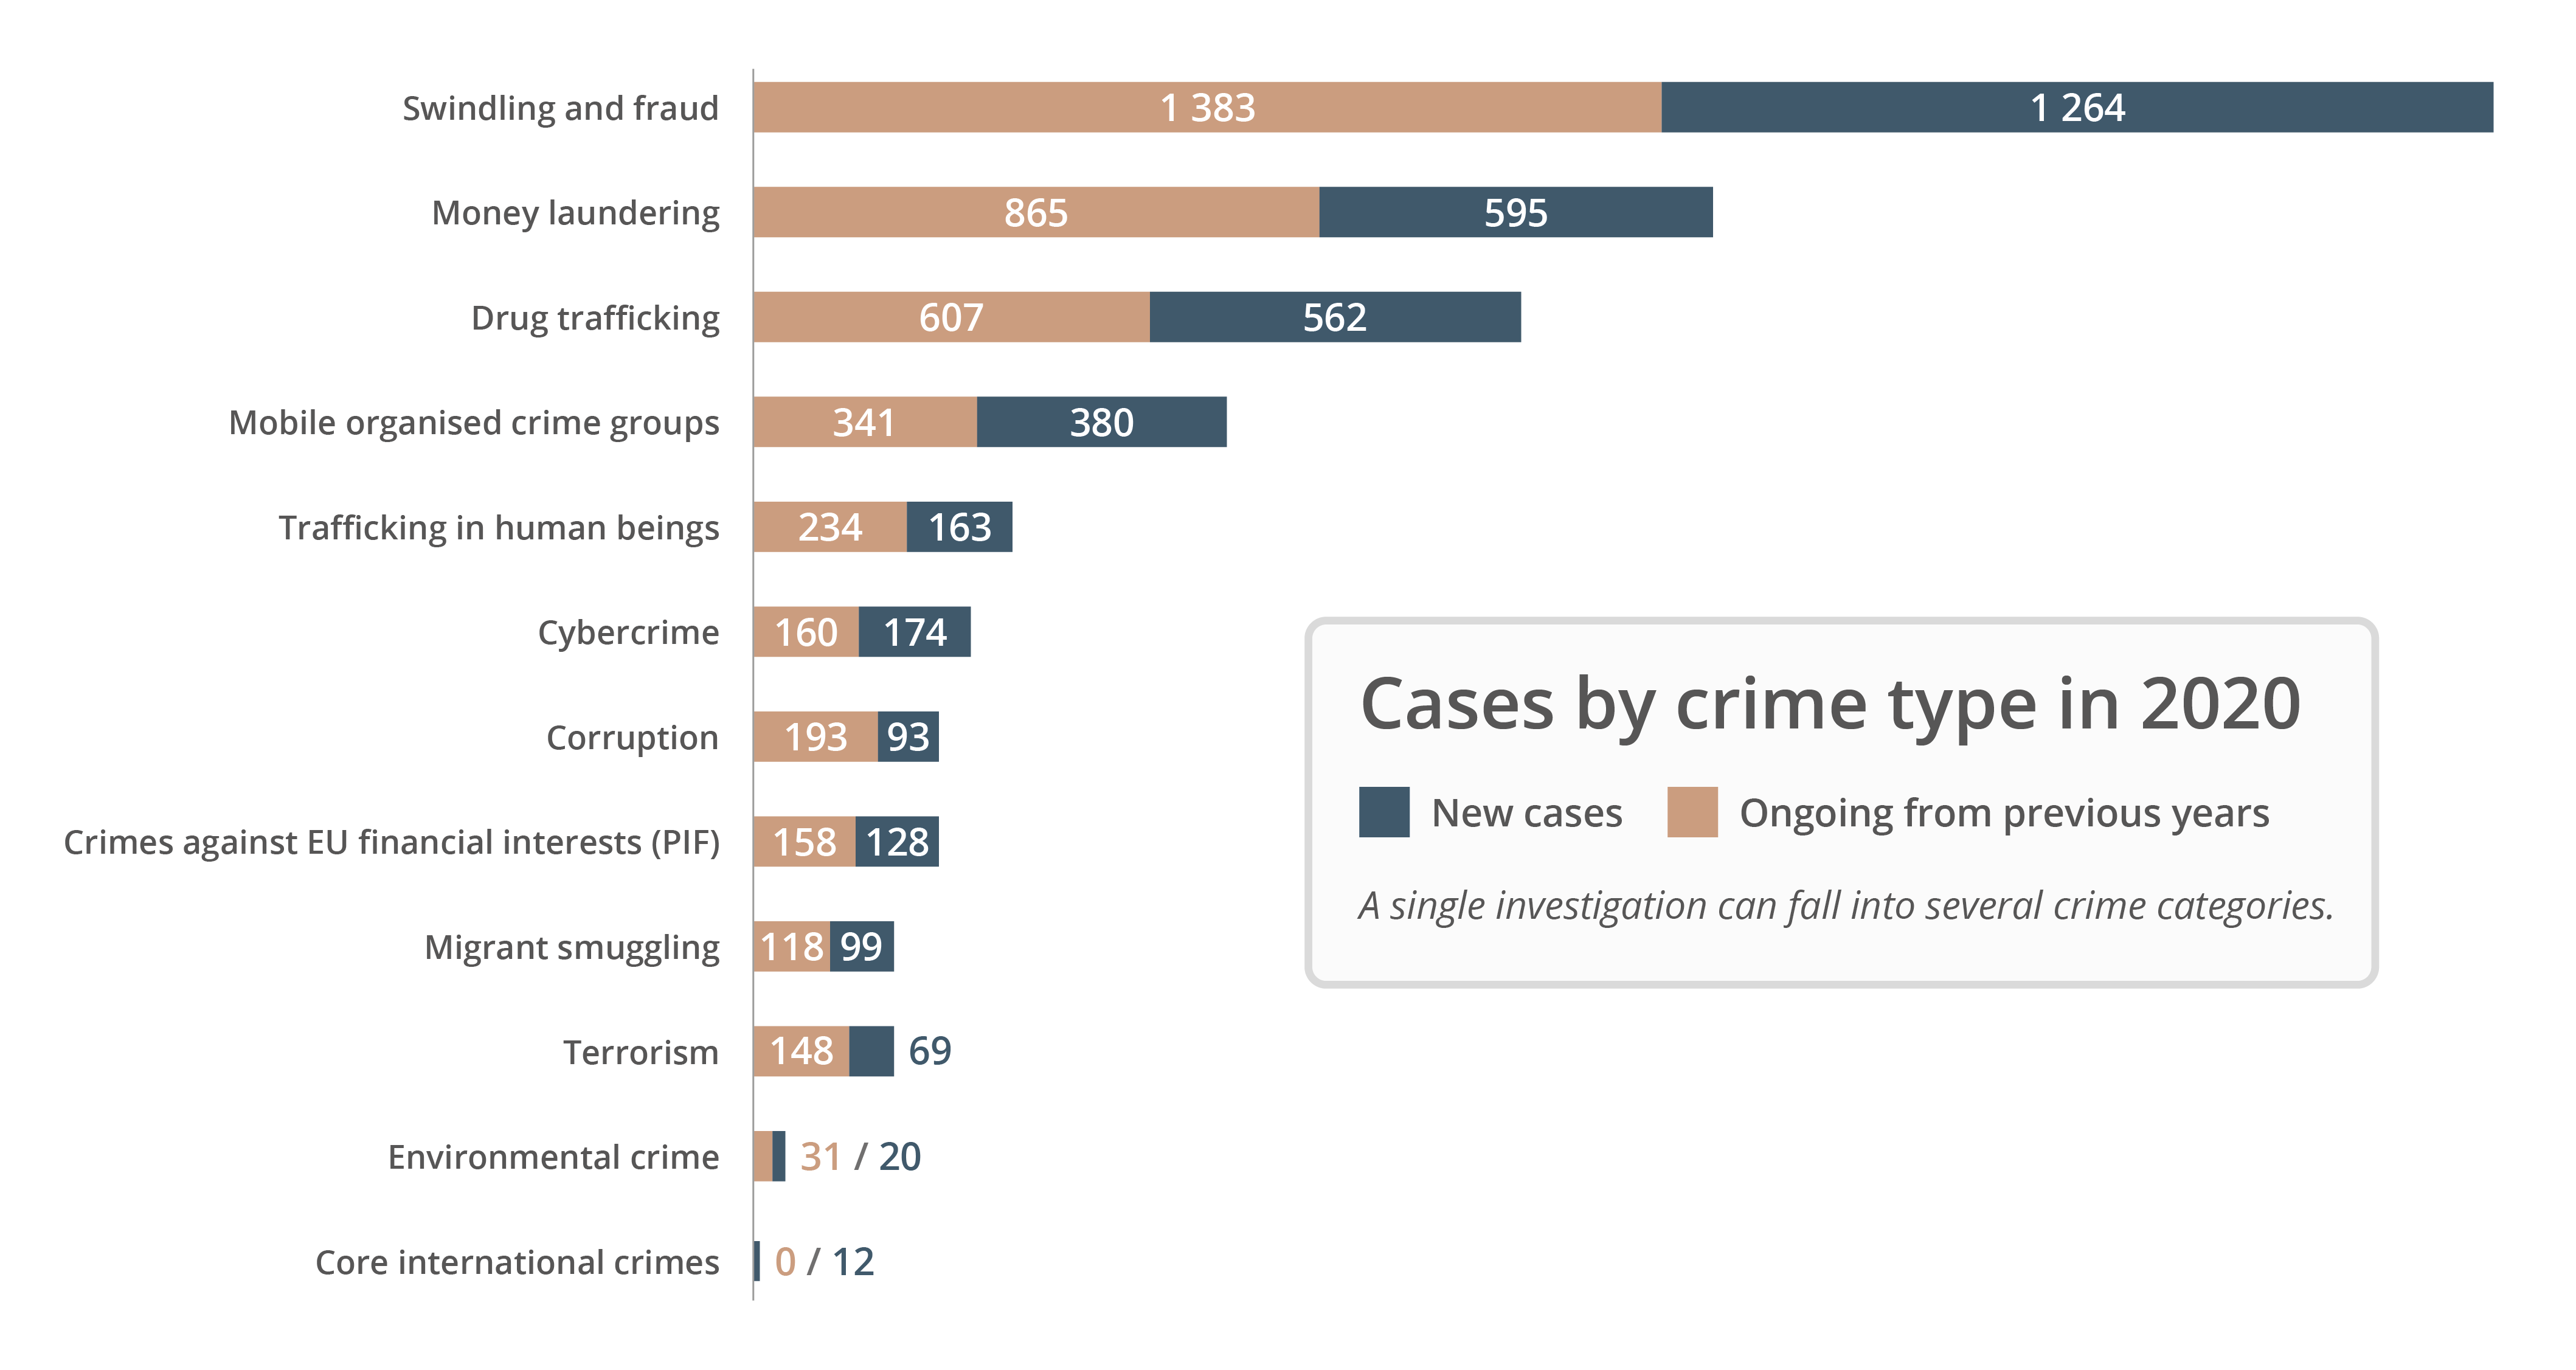 Cases by crime type in 2020